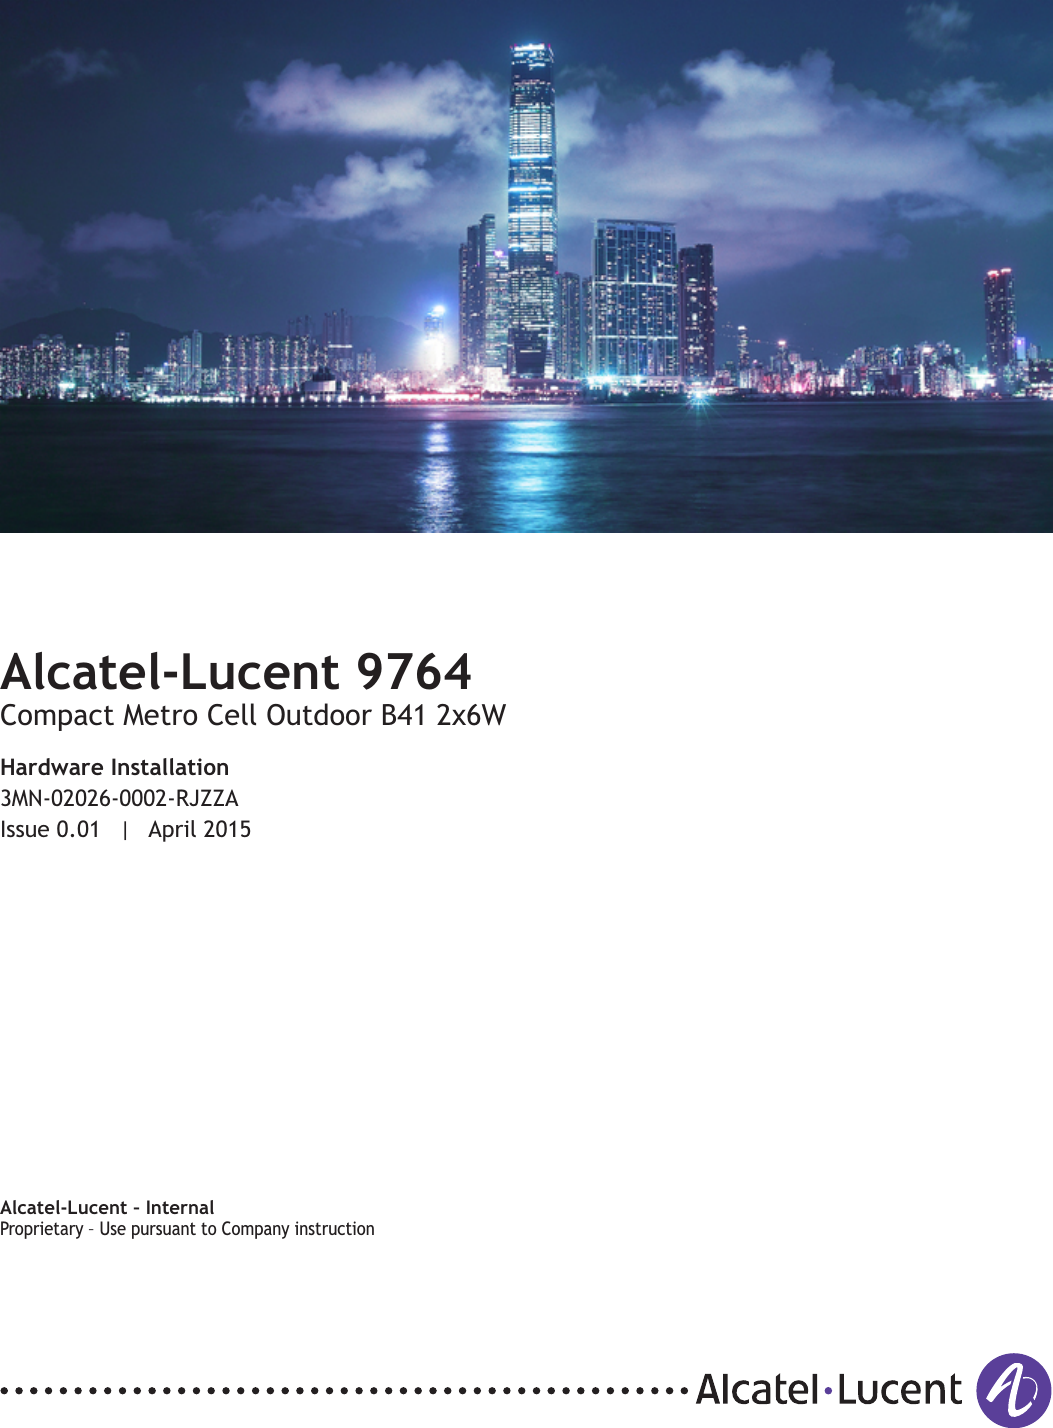 Title pageAlcatel-Lucent 9764Compact Metro Cell Outdoor B41 2x6WHardware Installation3MN-02026-0002-RJZZAIssue 0.01 | April 2015Alcatel-Lucent – InternalProprietary – Use pursuant to Company instructionProprietary Use pursuant to Company instructionPRELIMINARYPRELIMINARY